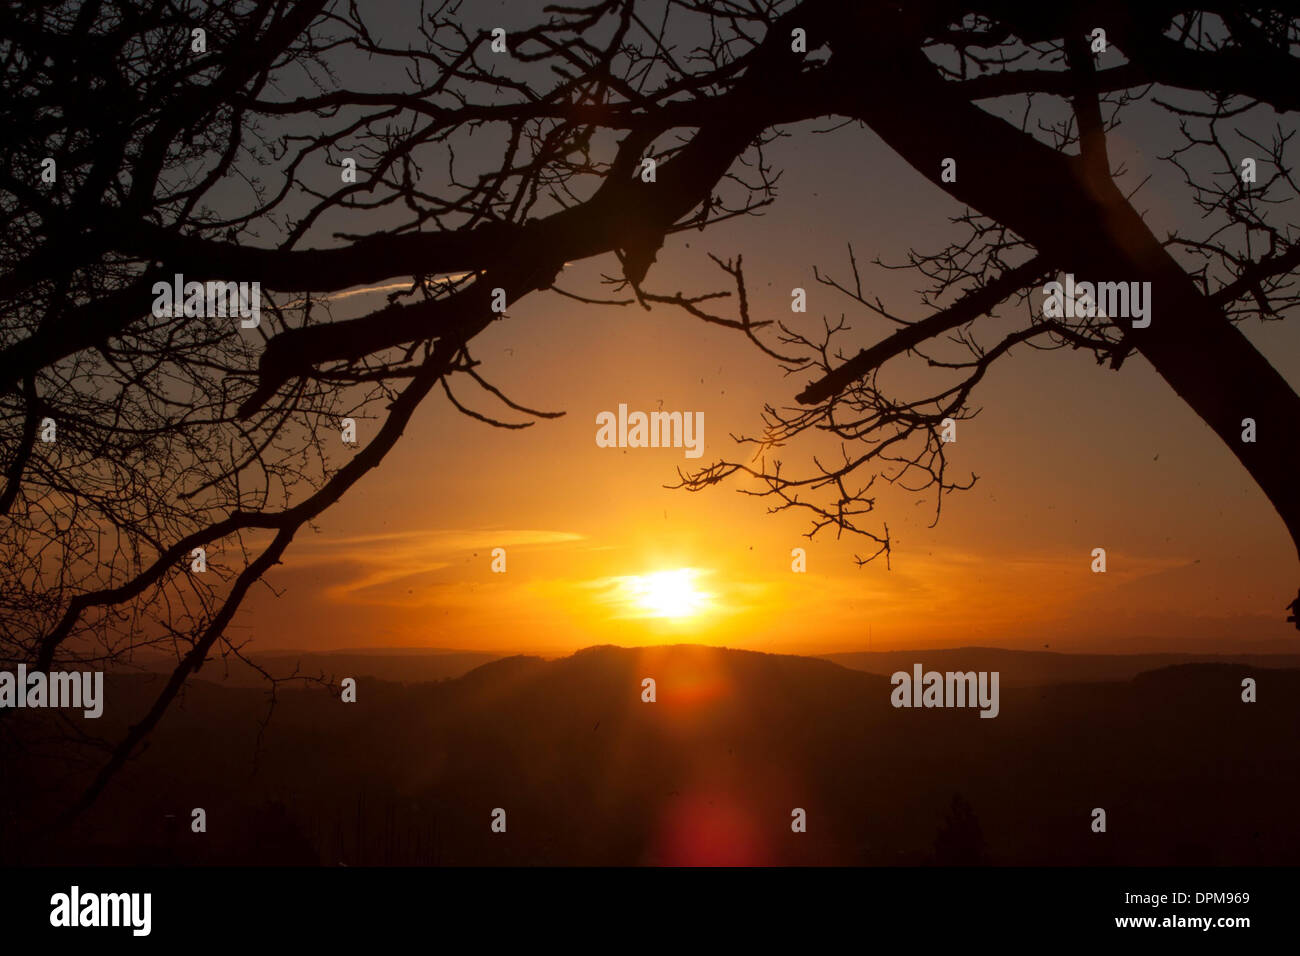 The sun sets over the Herefordshire countryside seen from atop the Malvern Hills. 28th December 2013. Stock Photo